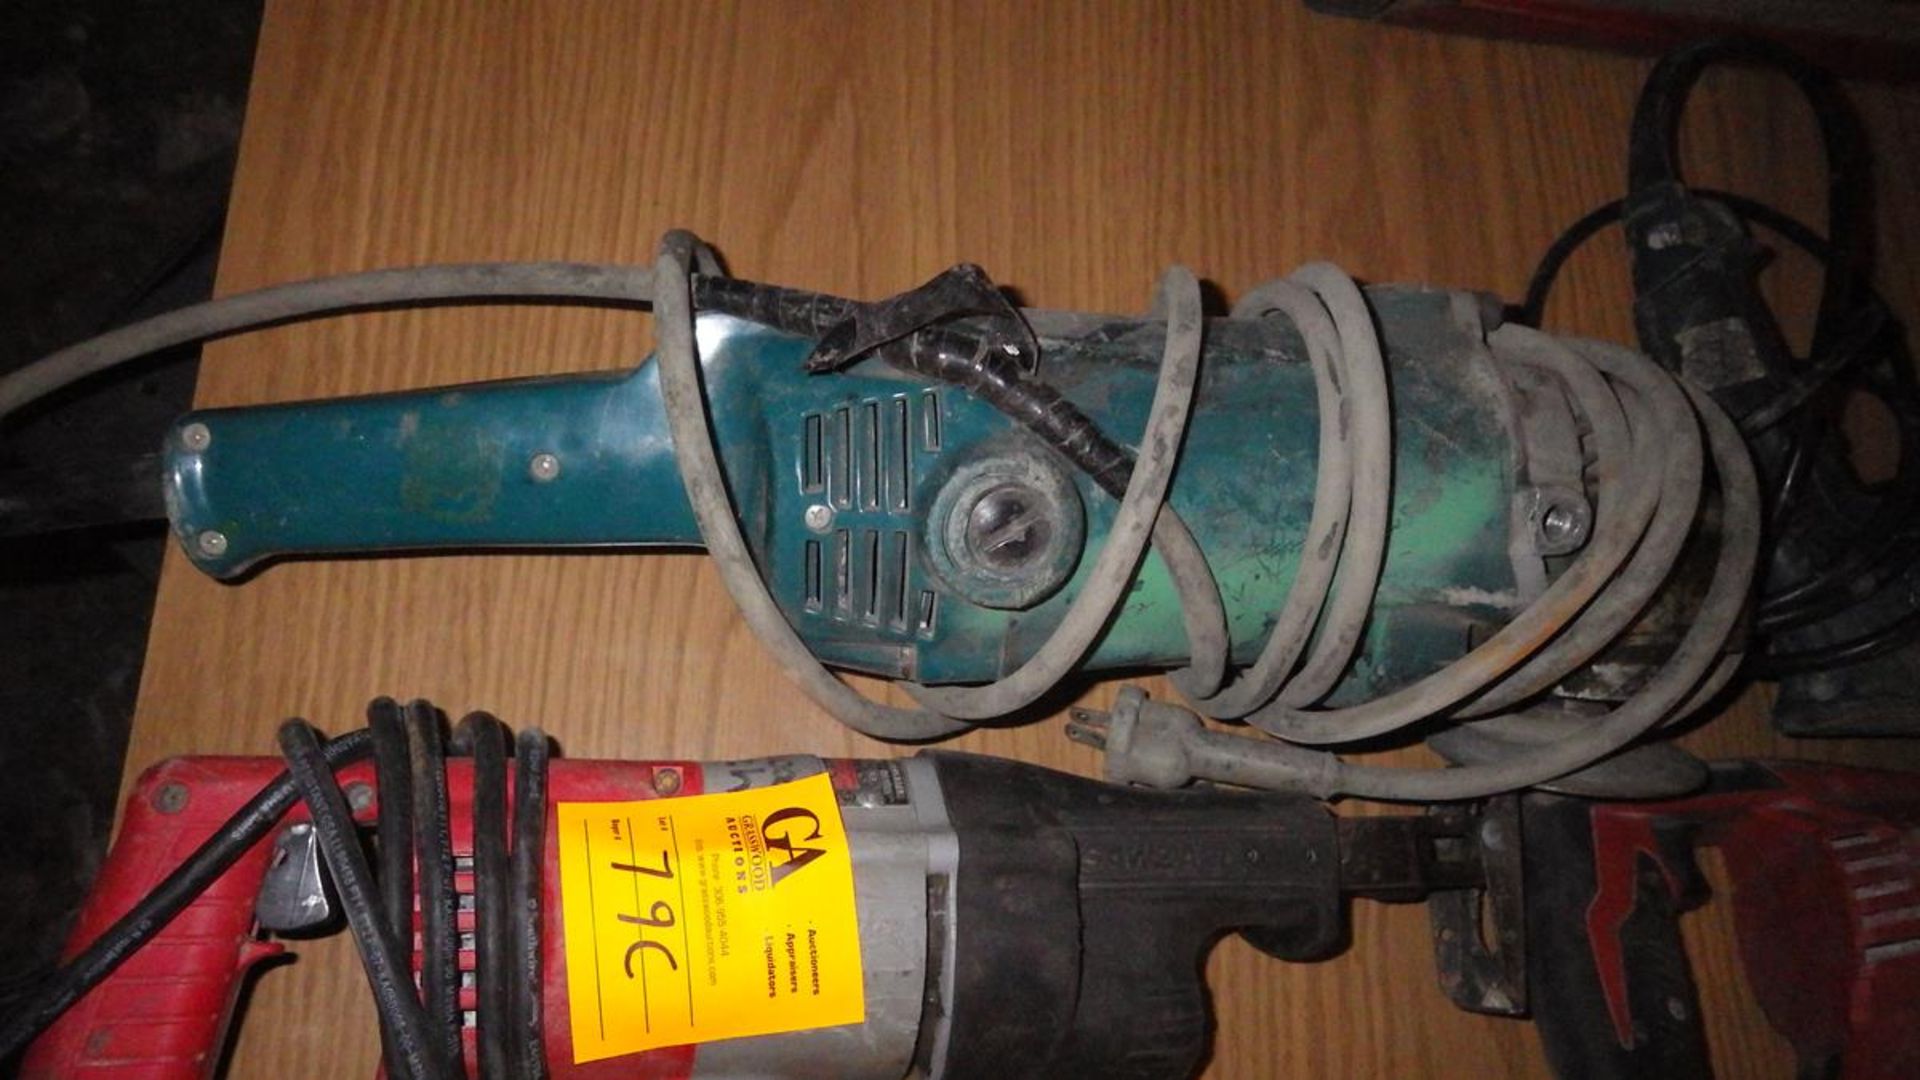 Two Milwaukee reciprocating saws one bosch hammer drill and one angle grinder - Image 3 of 5